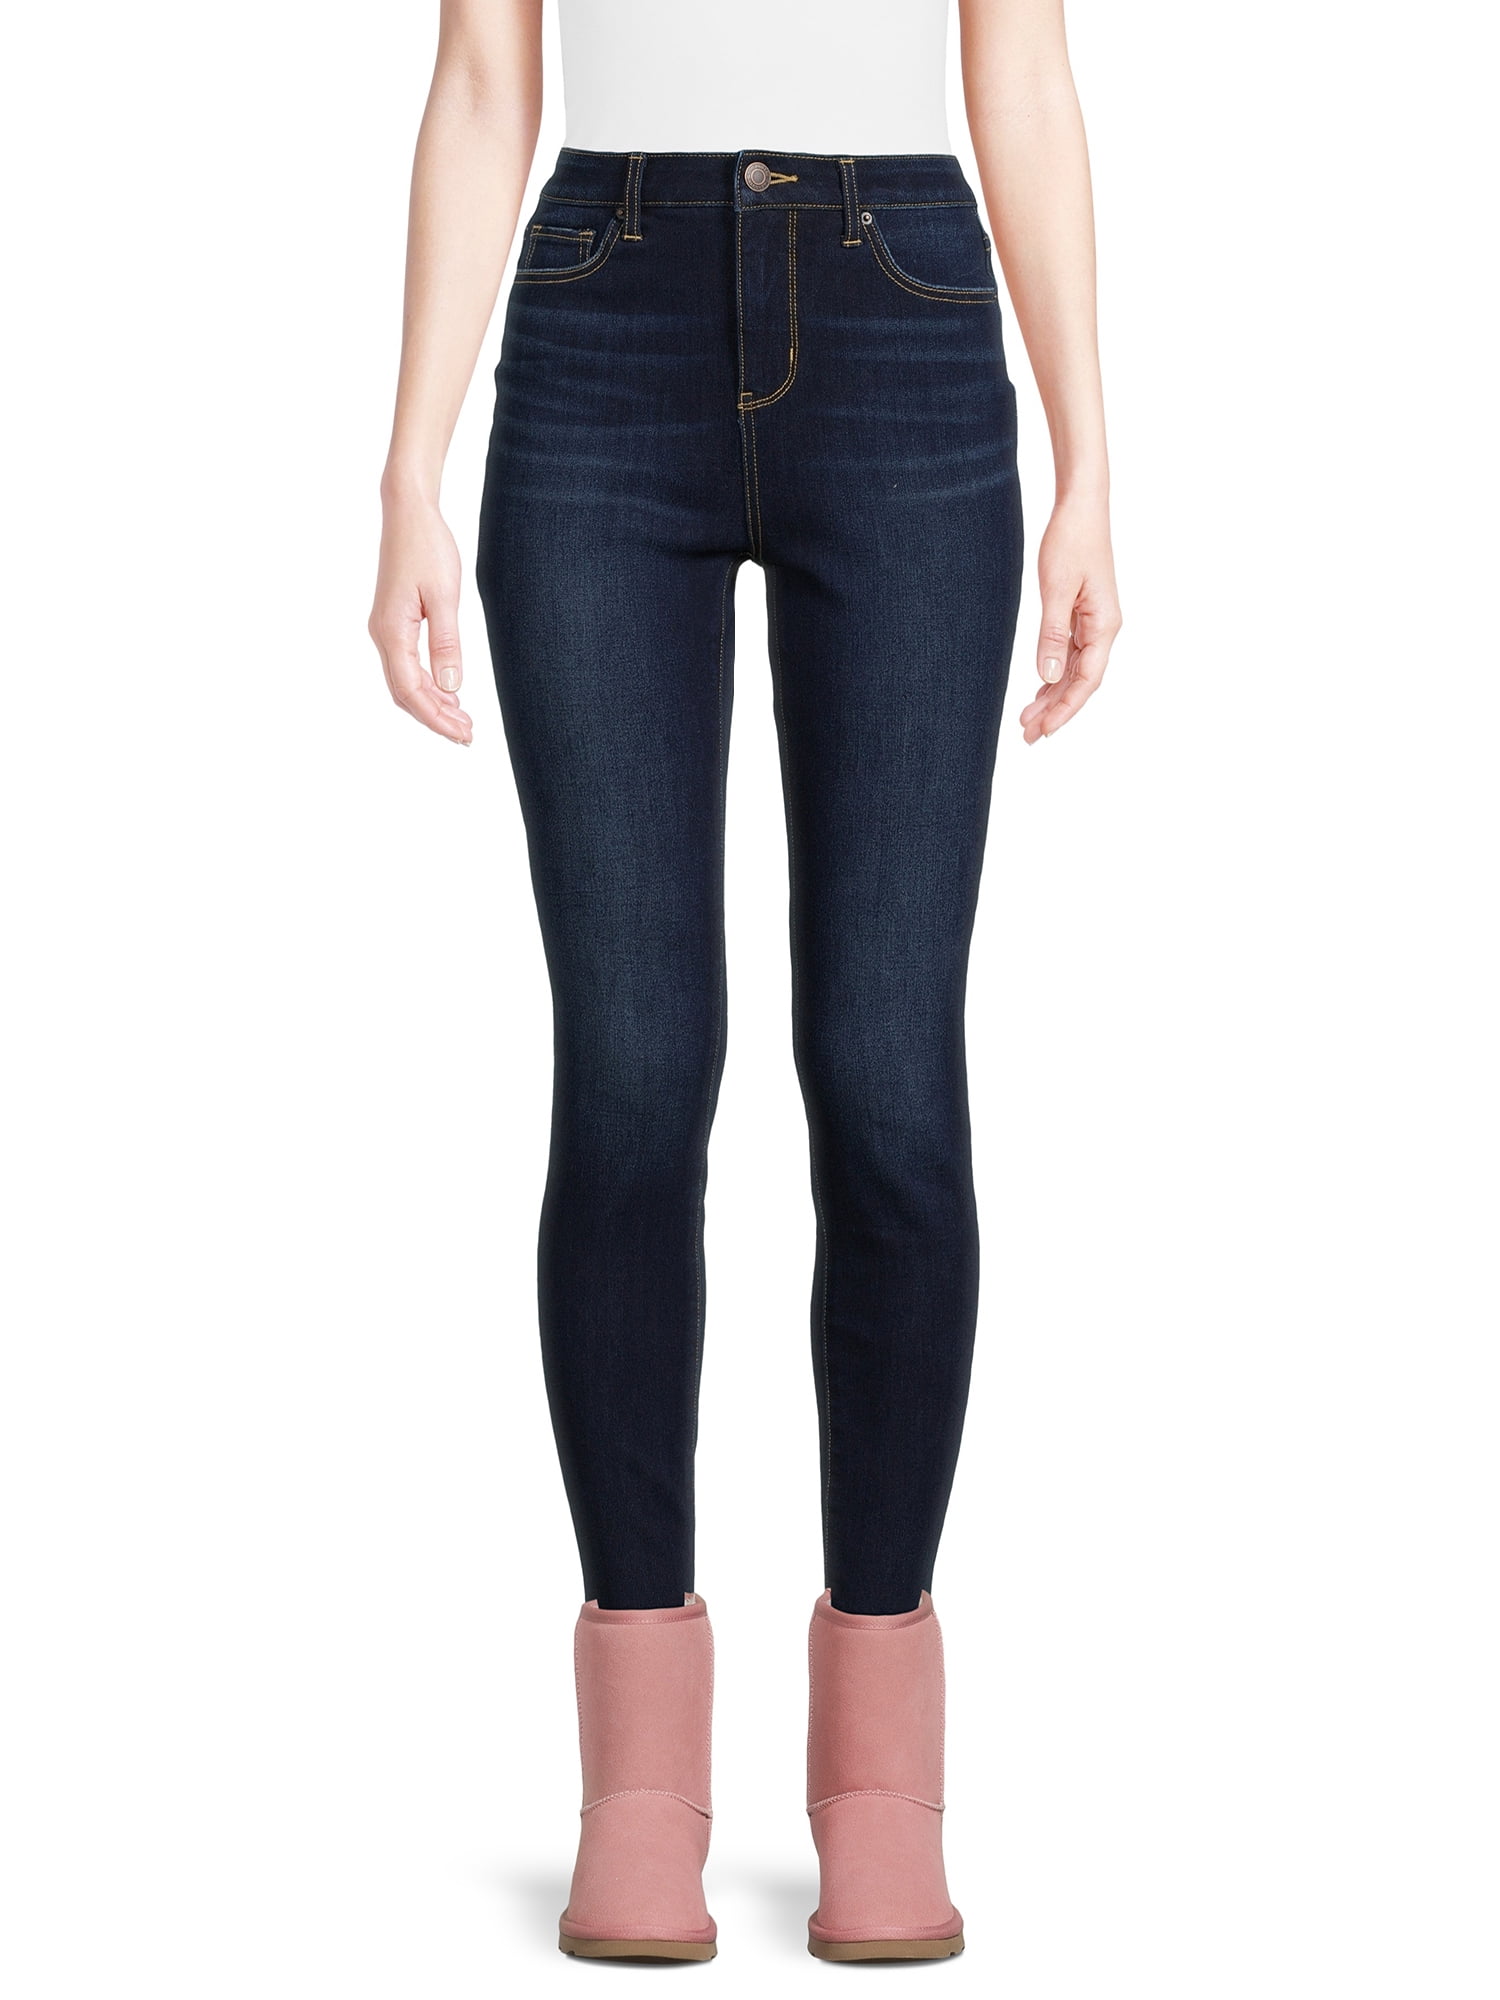 Time and Tru Women's High Rise Skinny Jeans, 29 Inseam for Regular, Sizes  2-20